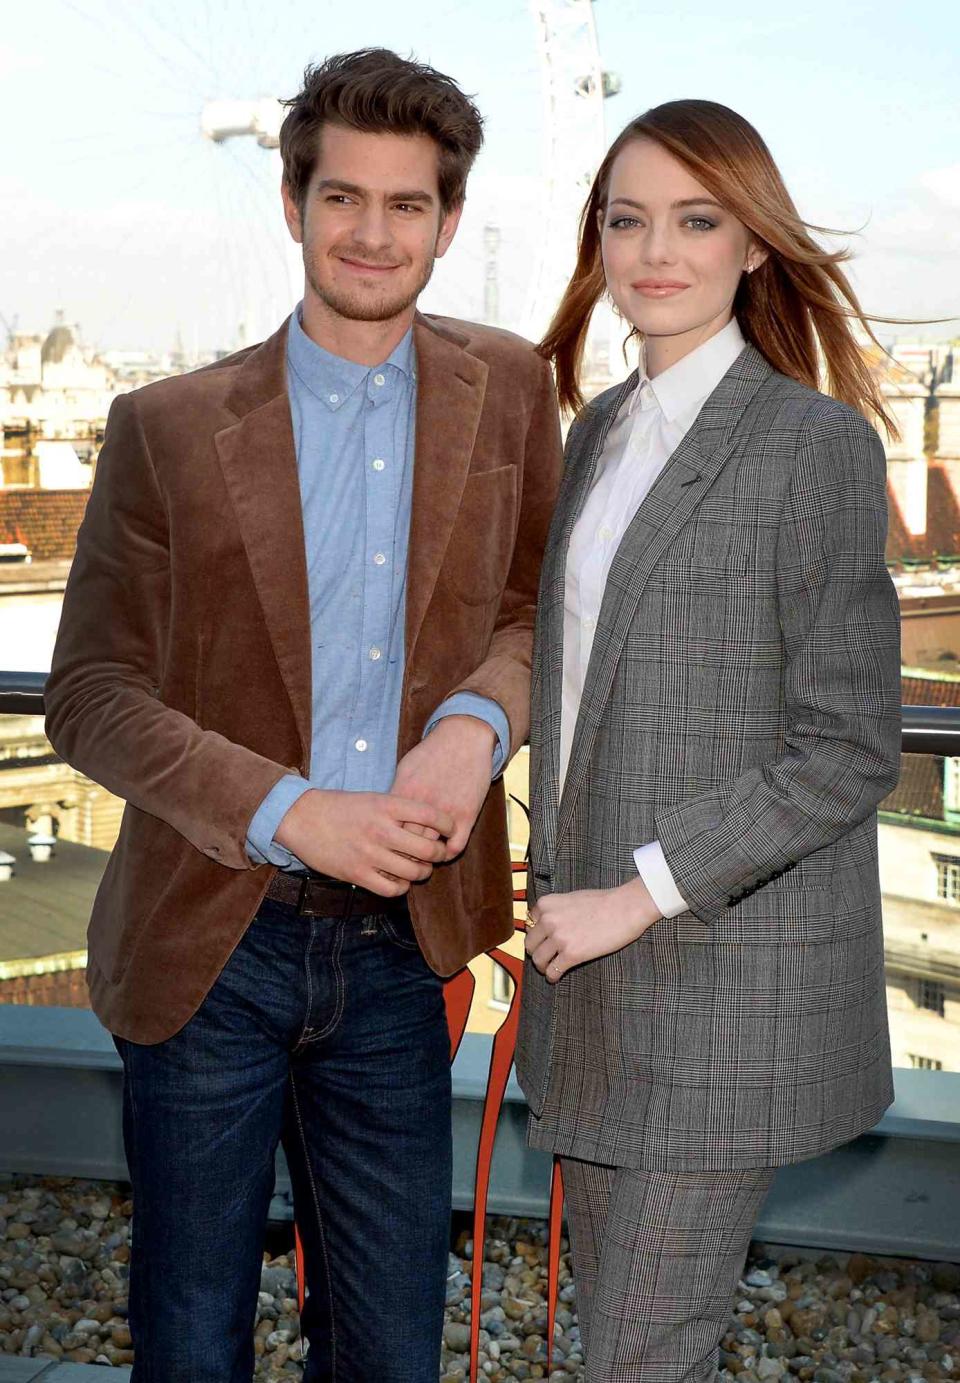 Andrew Garfield and Emma Stone attend "The Amazing Spider-Man 2" photocall at Park Plaza Westminster Bridge Hotel on April 9, 2014 in London, England